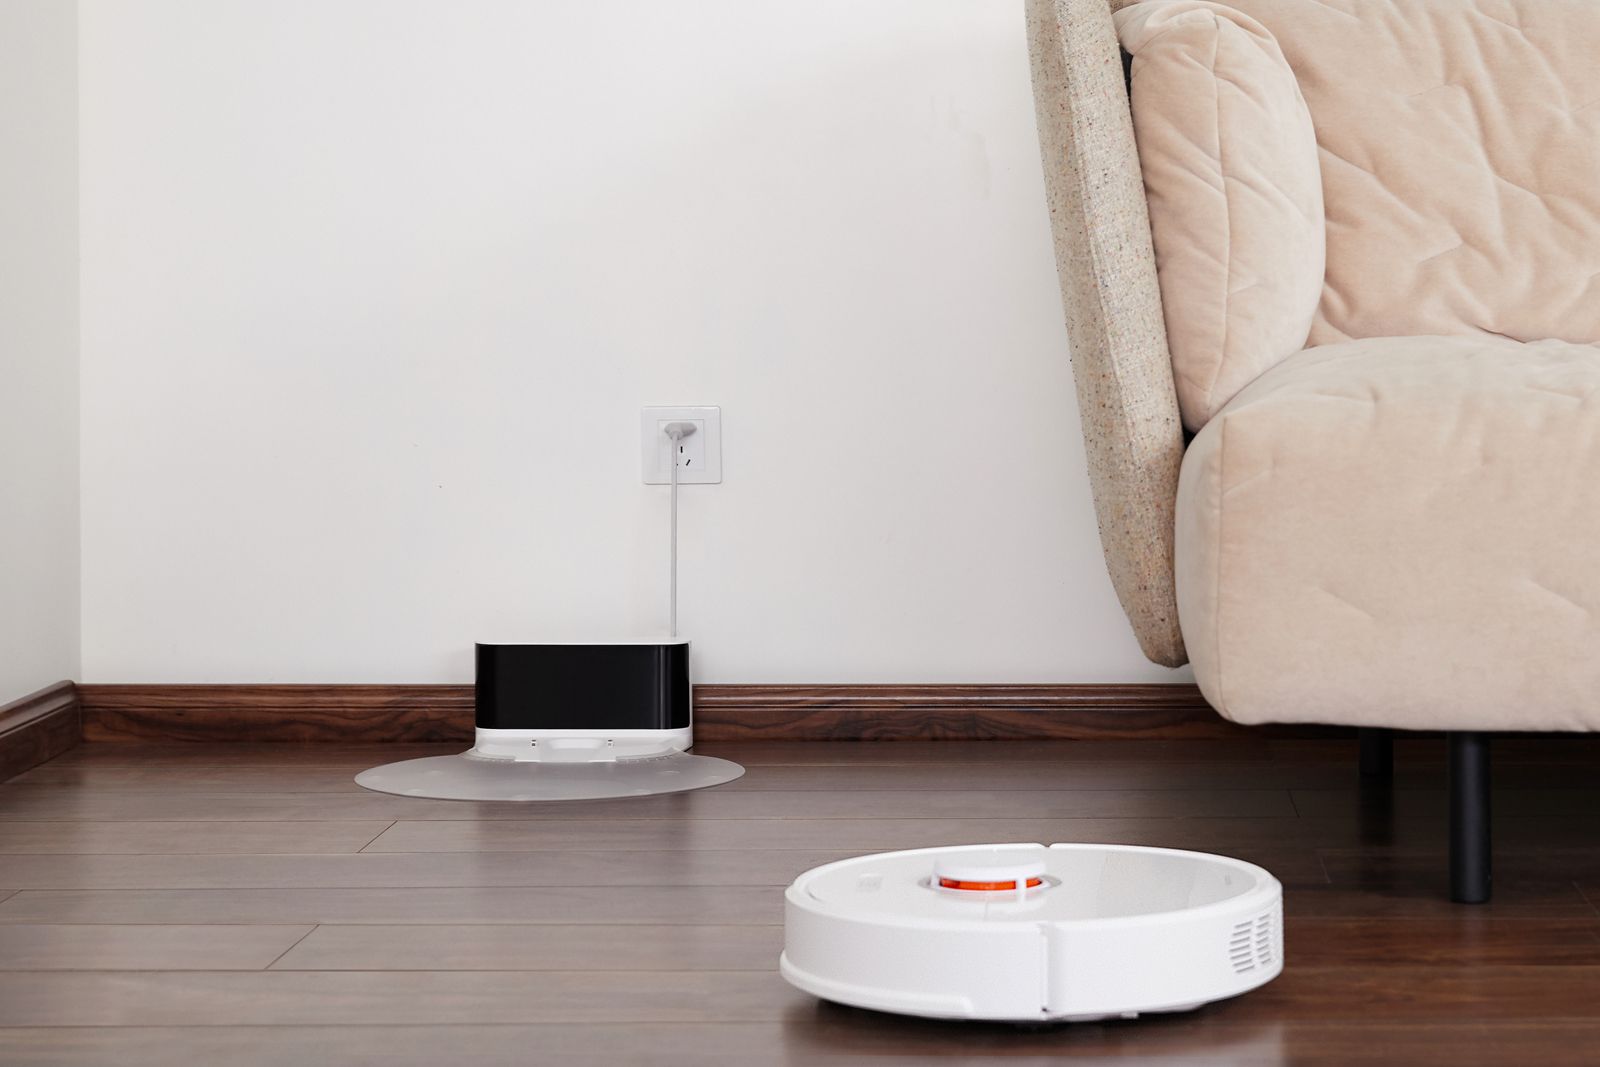 5 myths of robot vacuum cleaners and how Roborock is answering them image 1